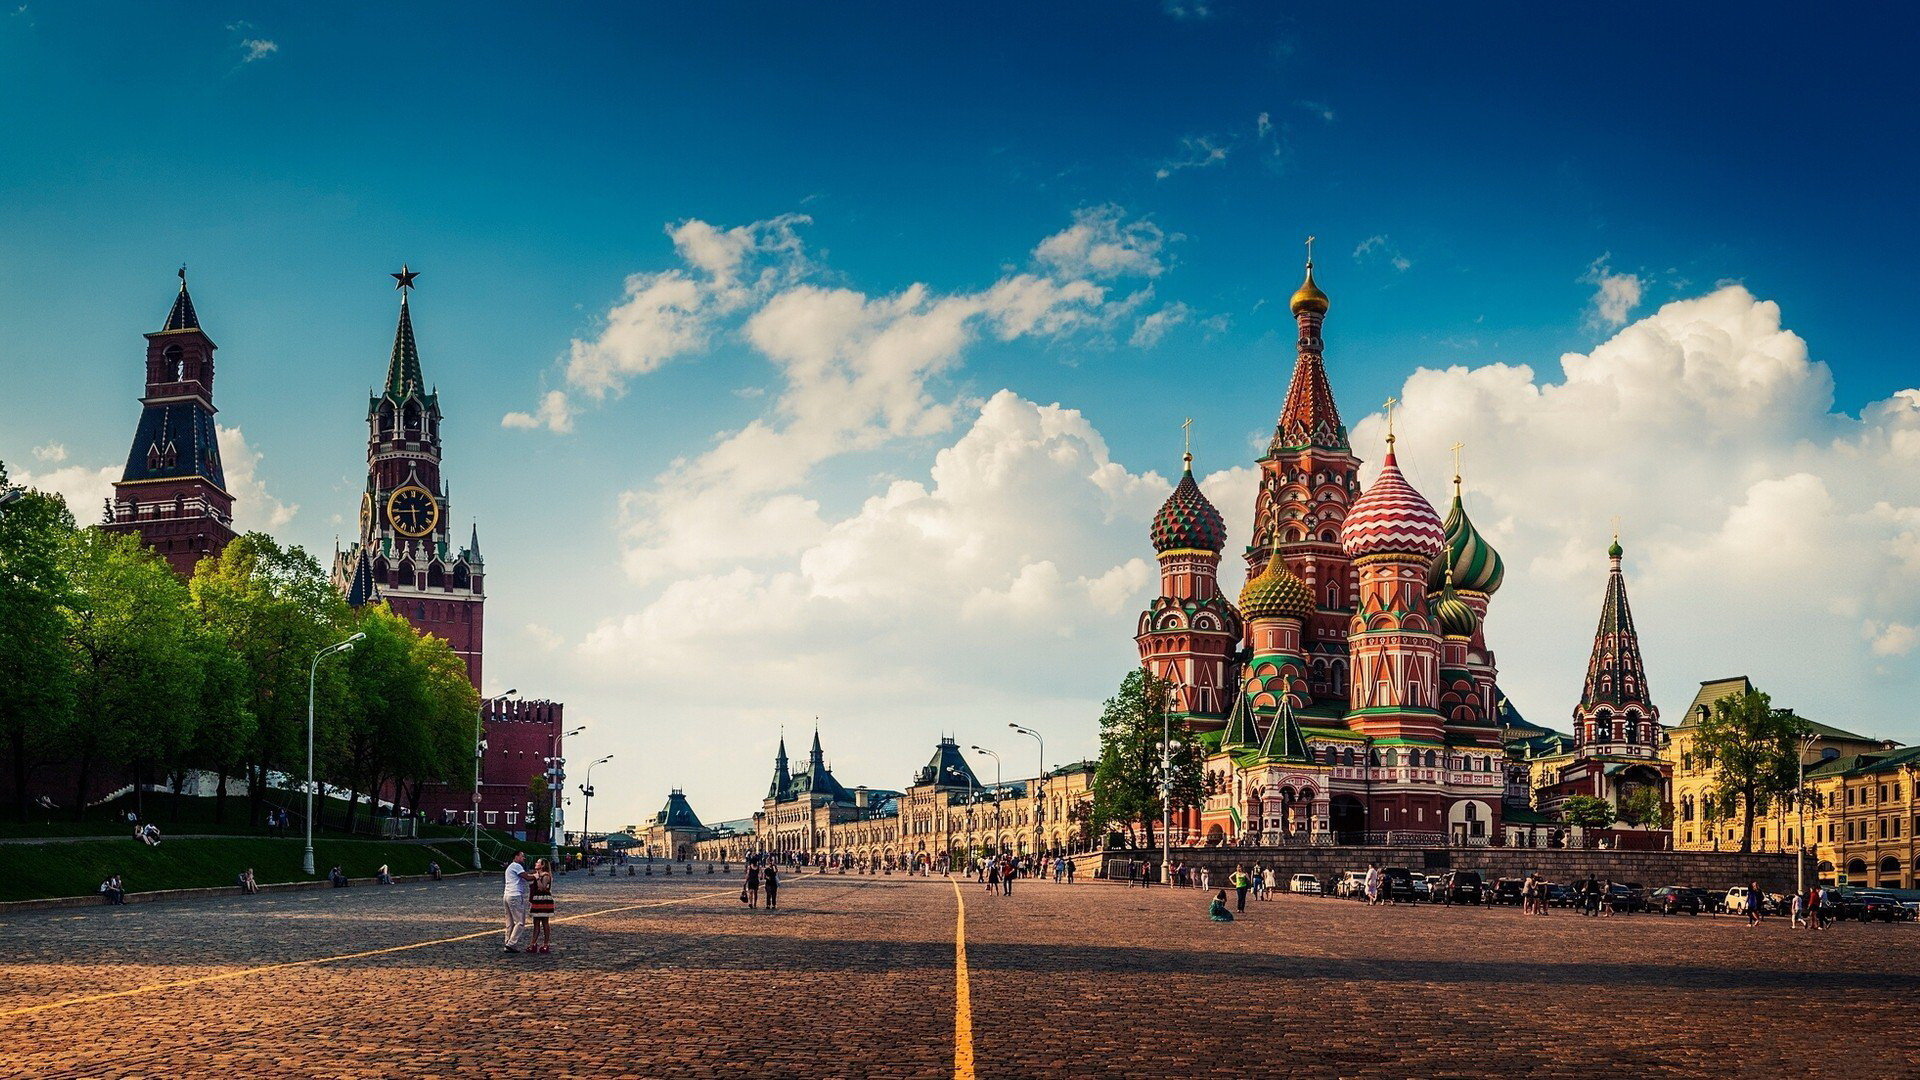 Moscow Wallpapers Hd For Desktop Backgrounds Images, Photos, Reviews